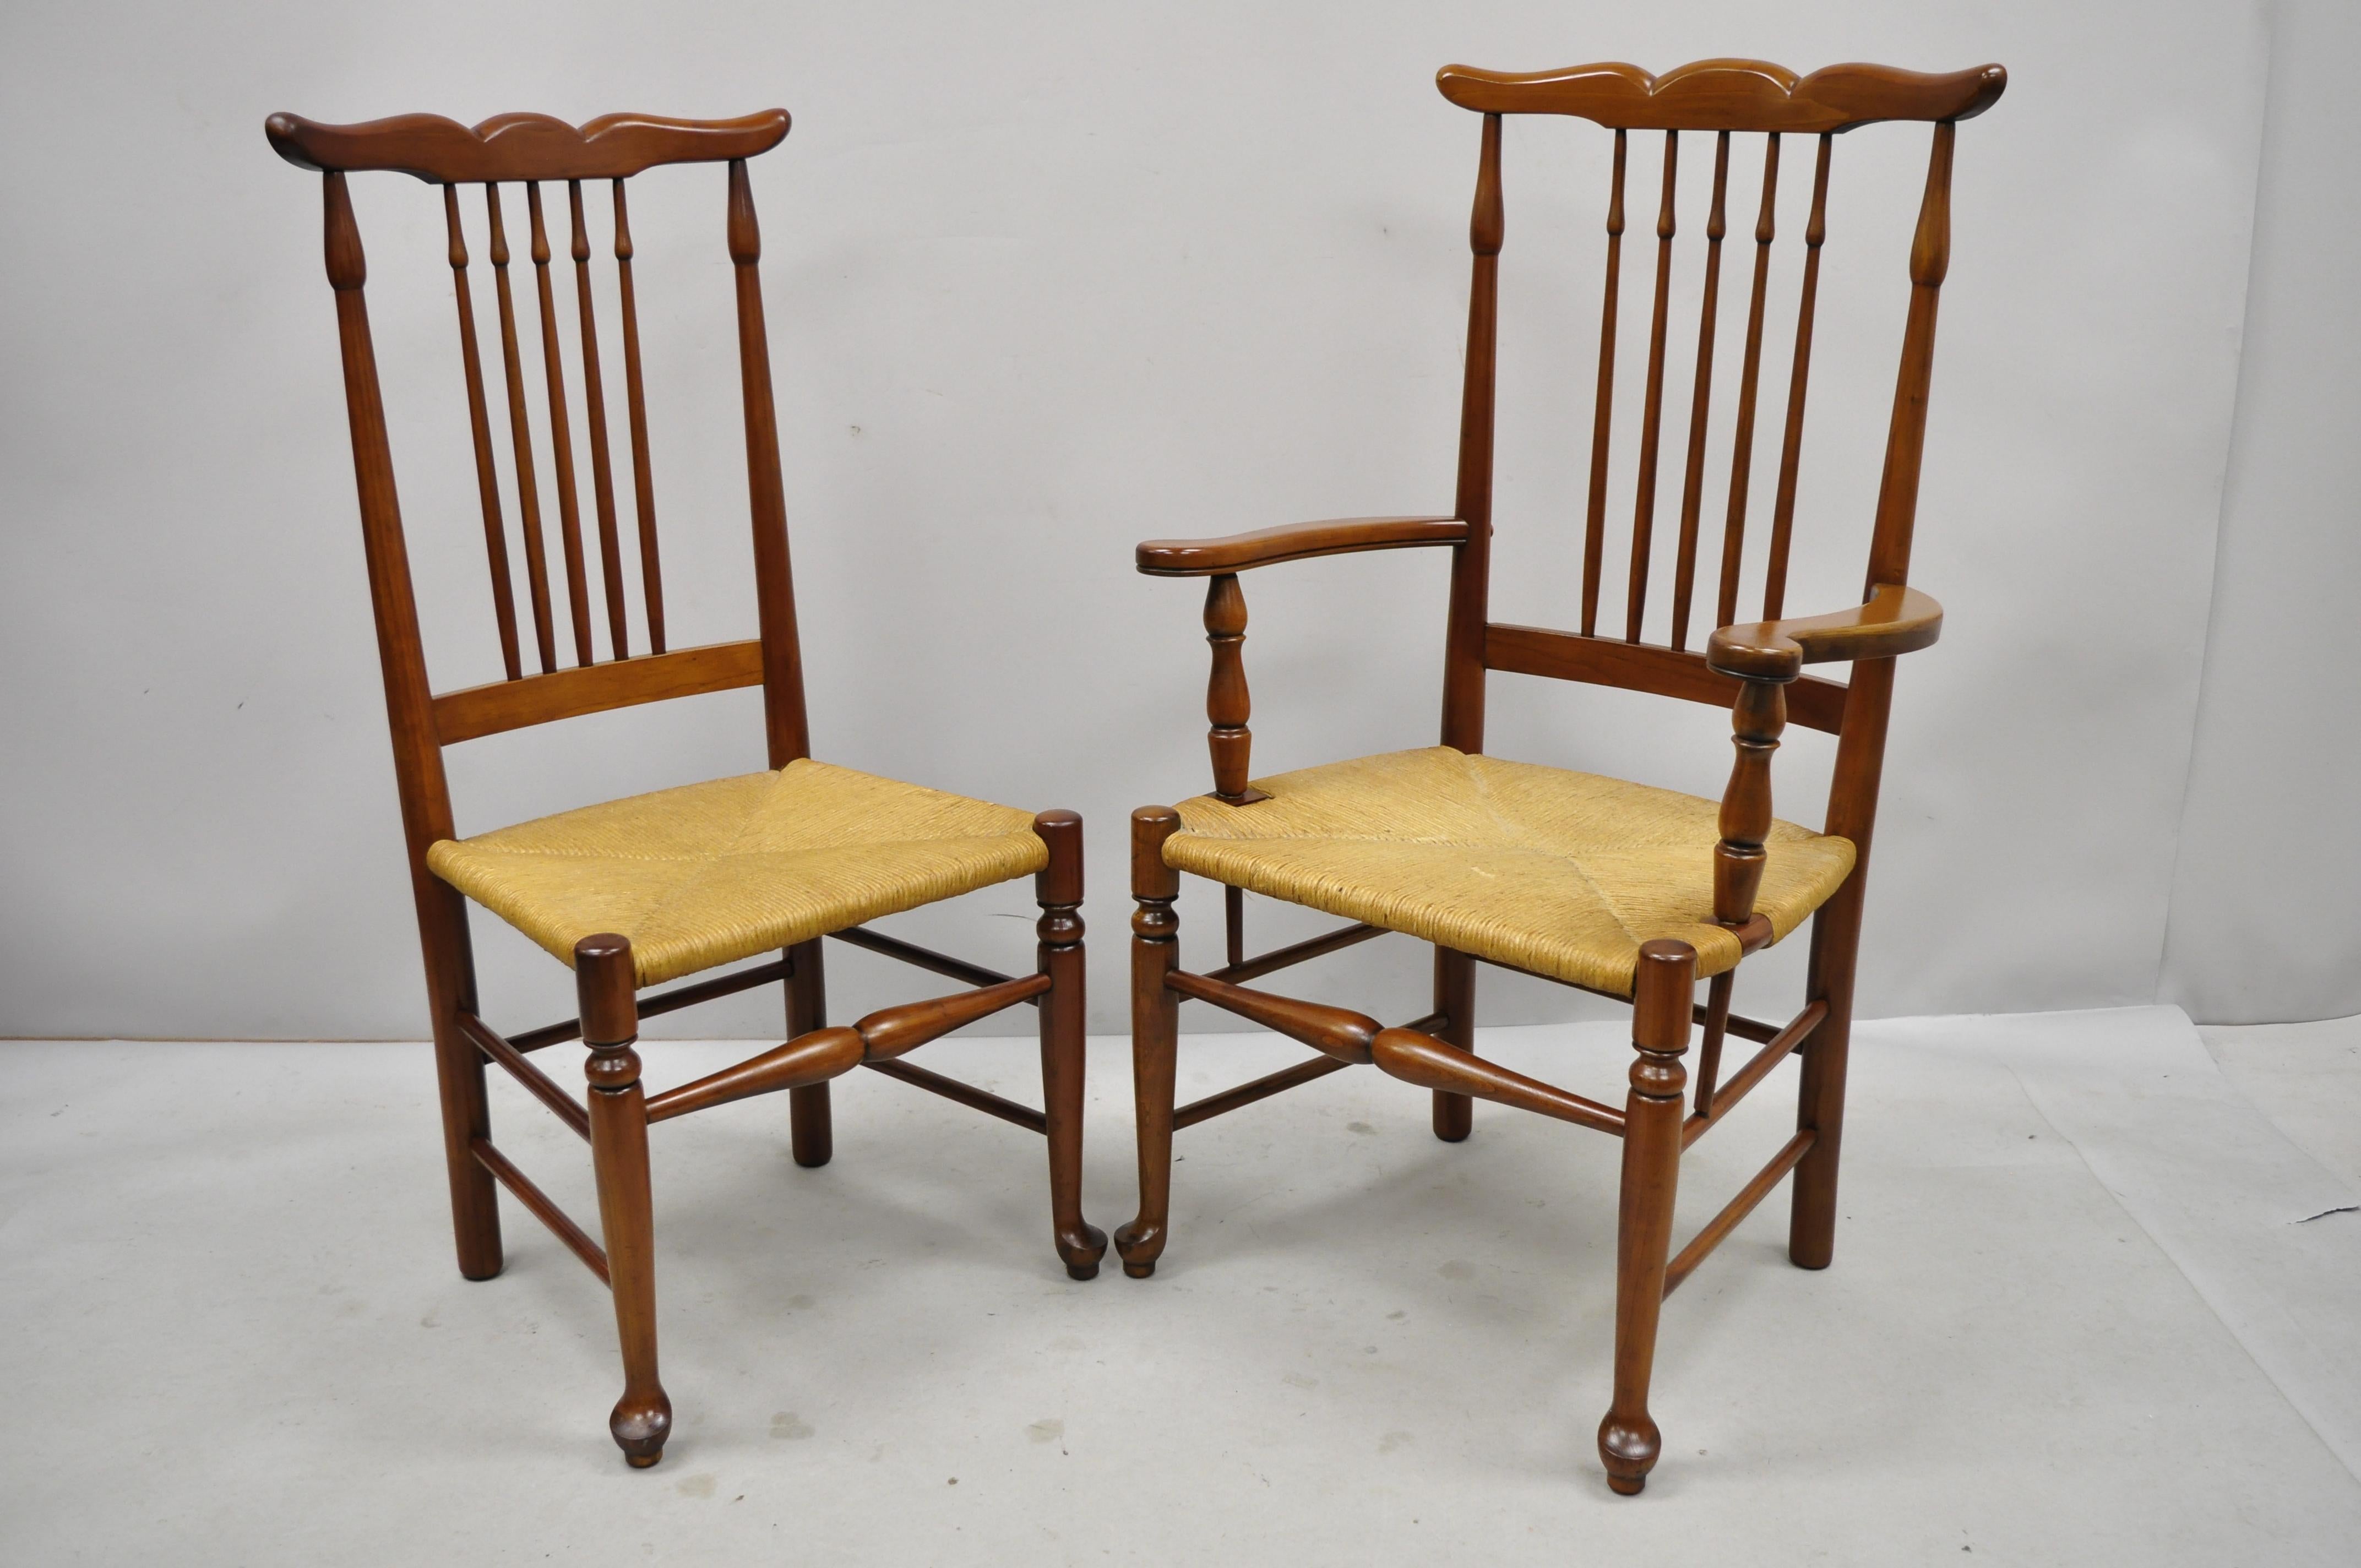 6 vintage spindle back cherrywood rush seat queen Anne Colonial dining chairs. Listing includes woven rush seats, spindle back, stretcher base, 2 armchairs, 4 side chairs, solid wood frame, beautiful wood grain, quality American craftsmanship, great